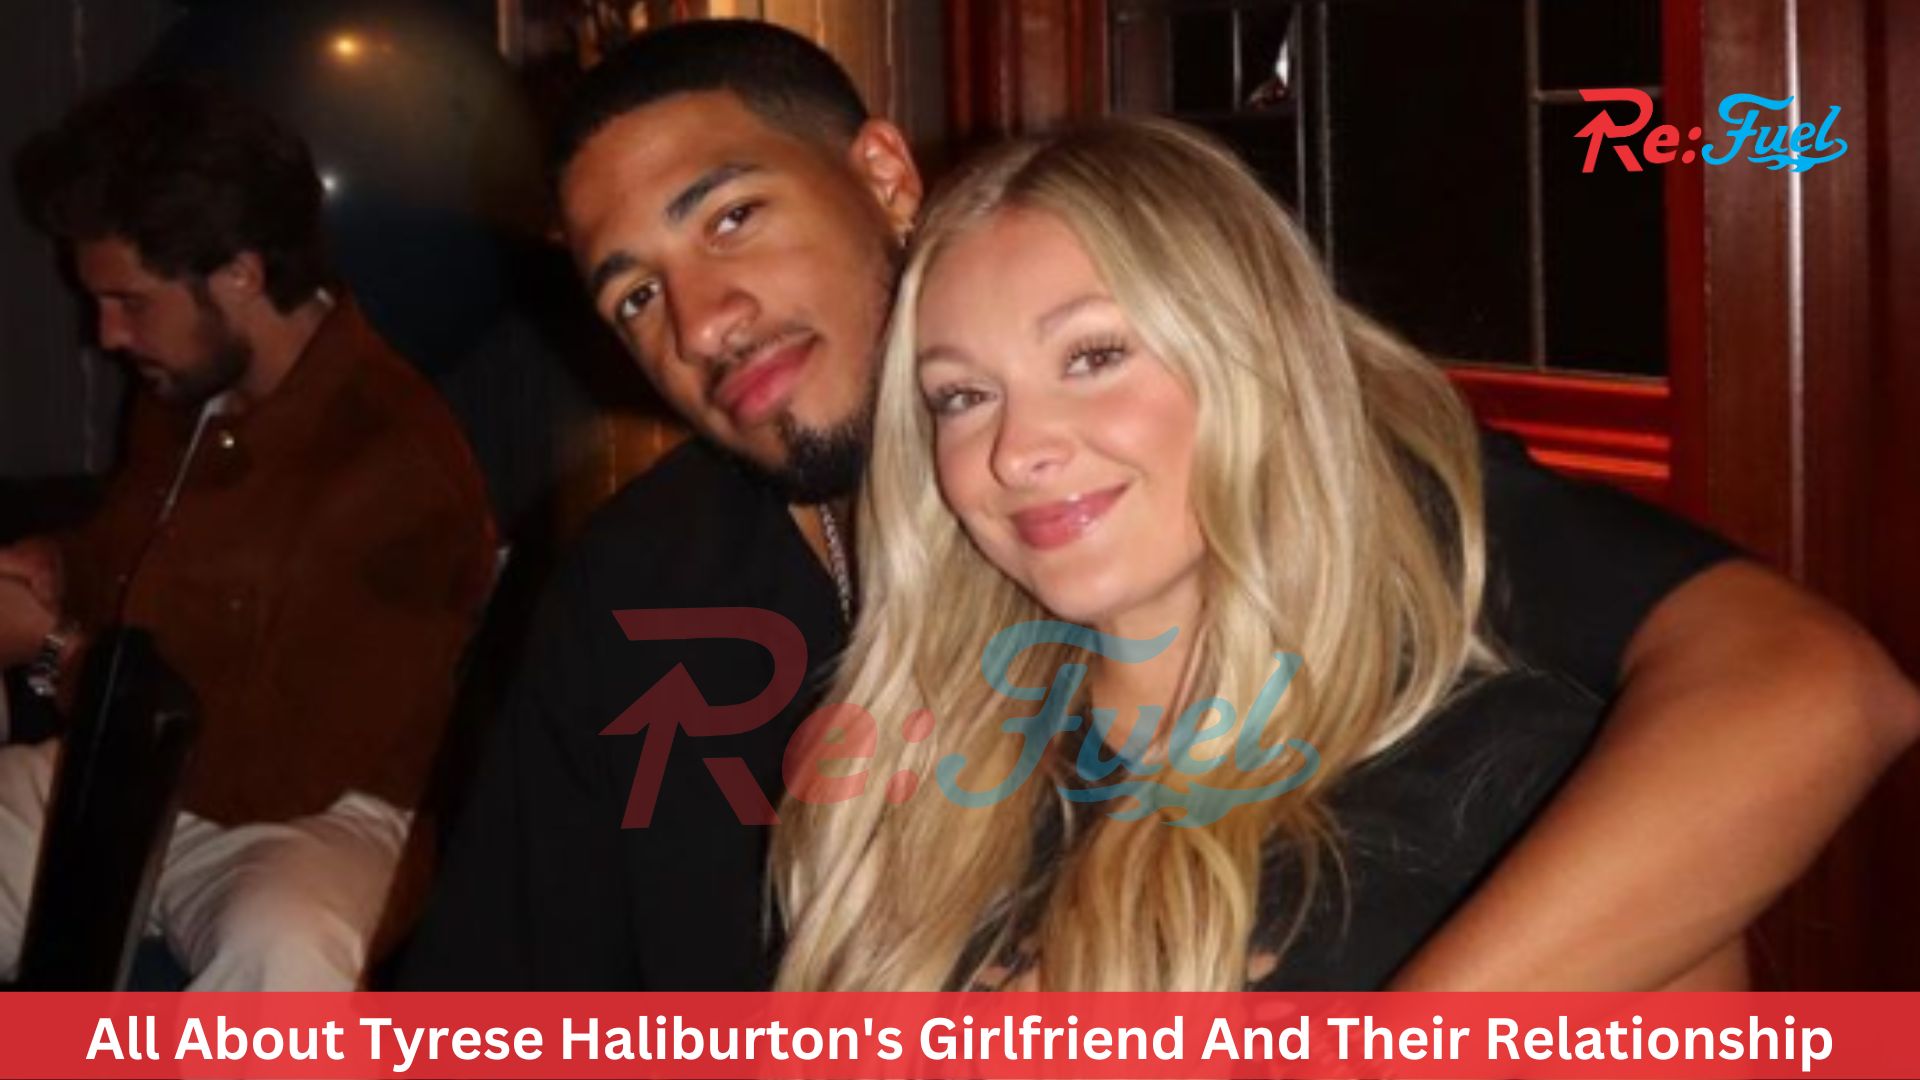 All About Tyrese Haliburton's Girlfriend And Their Relationship